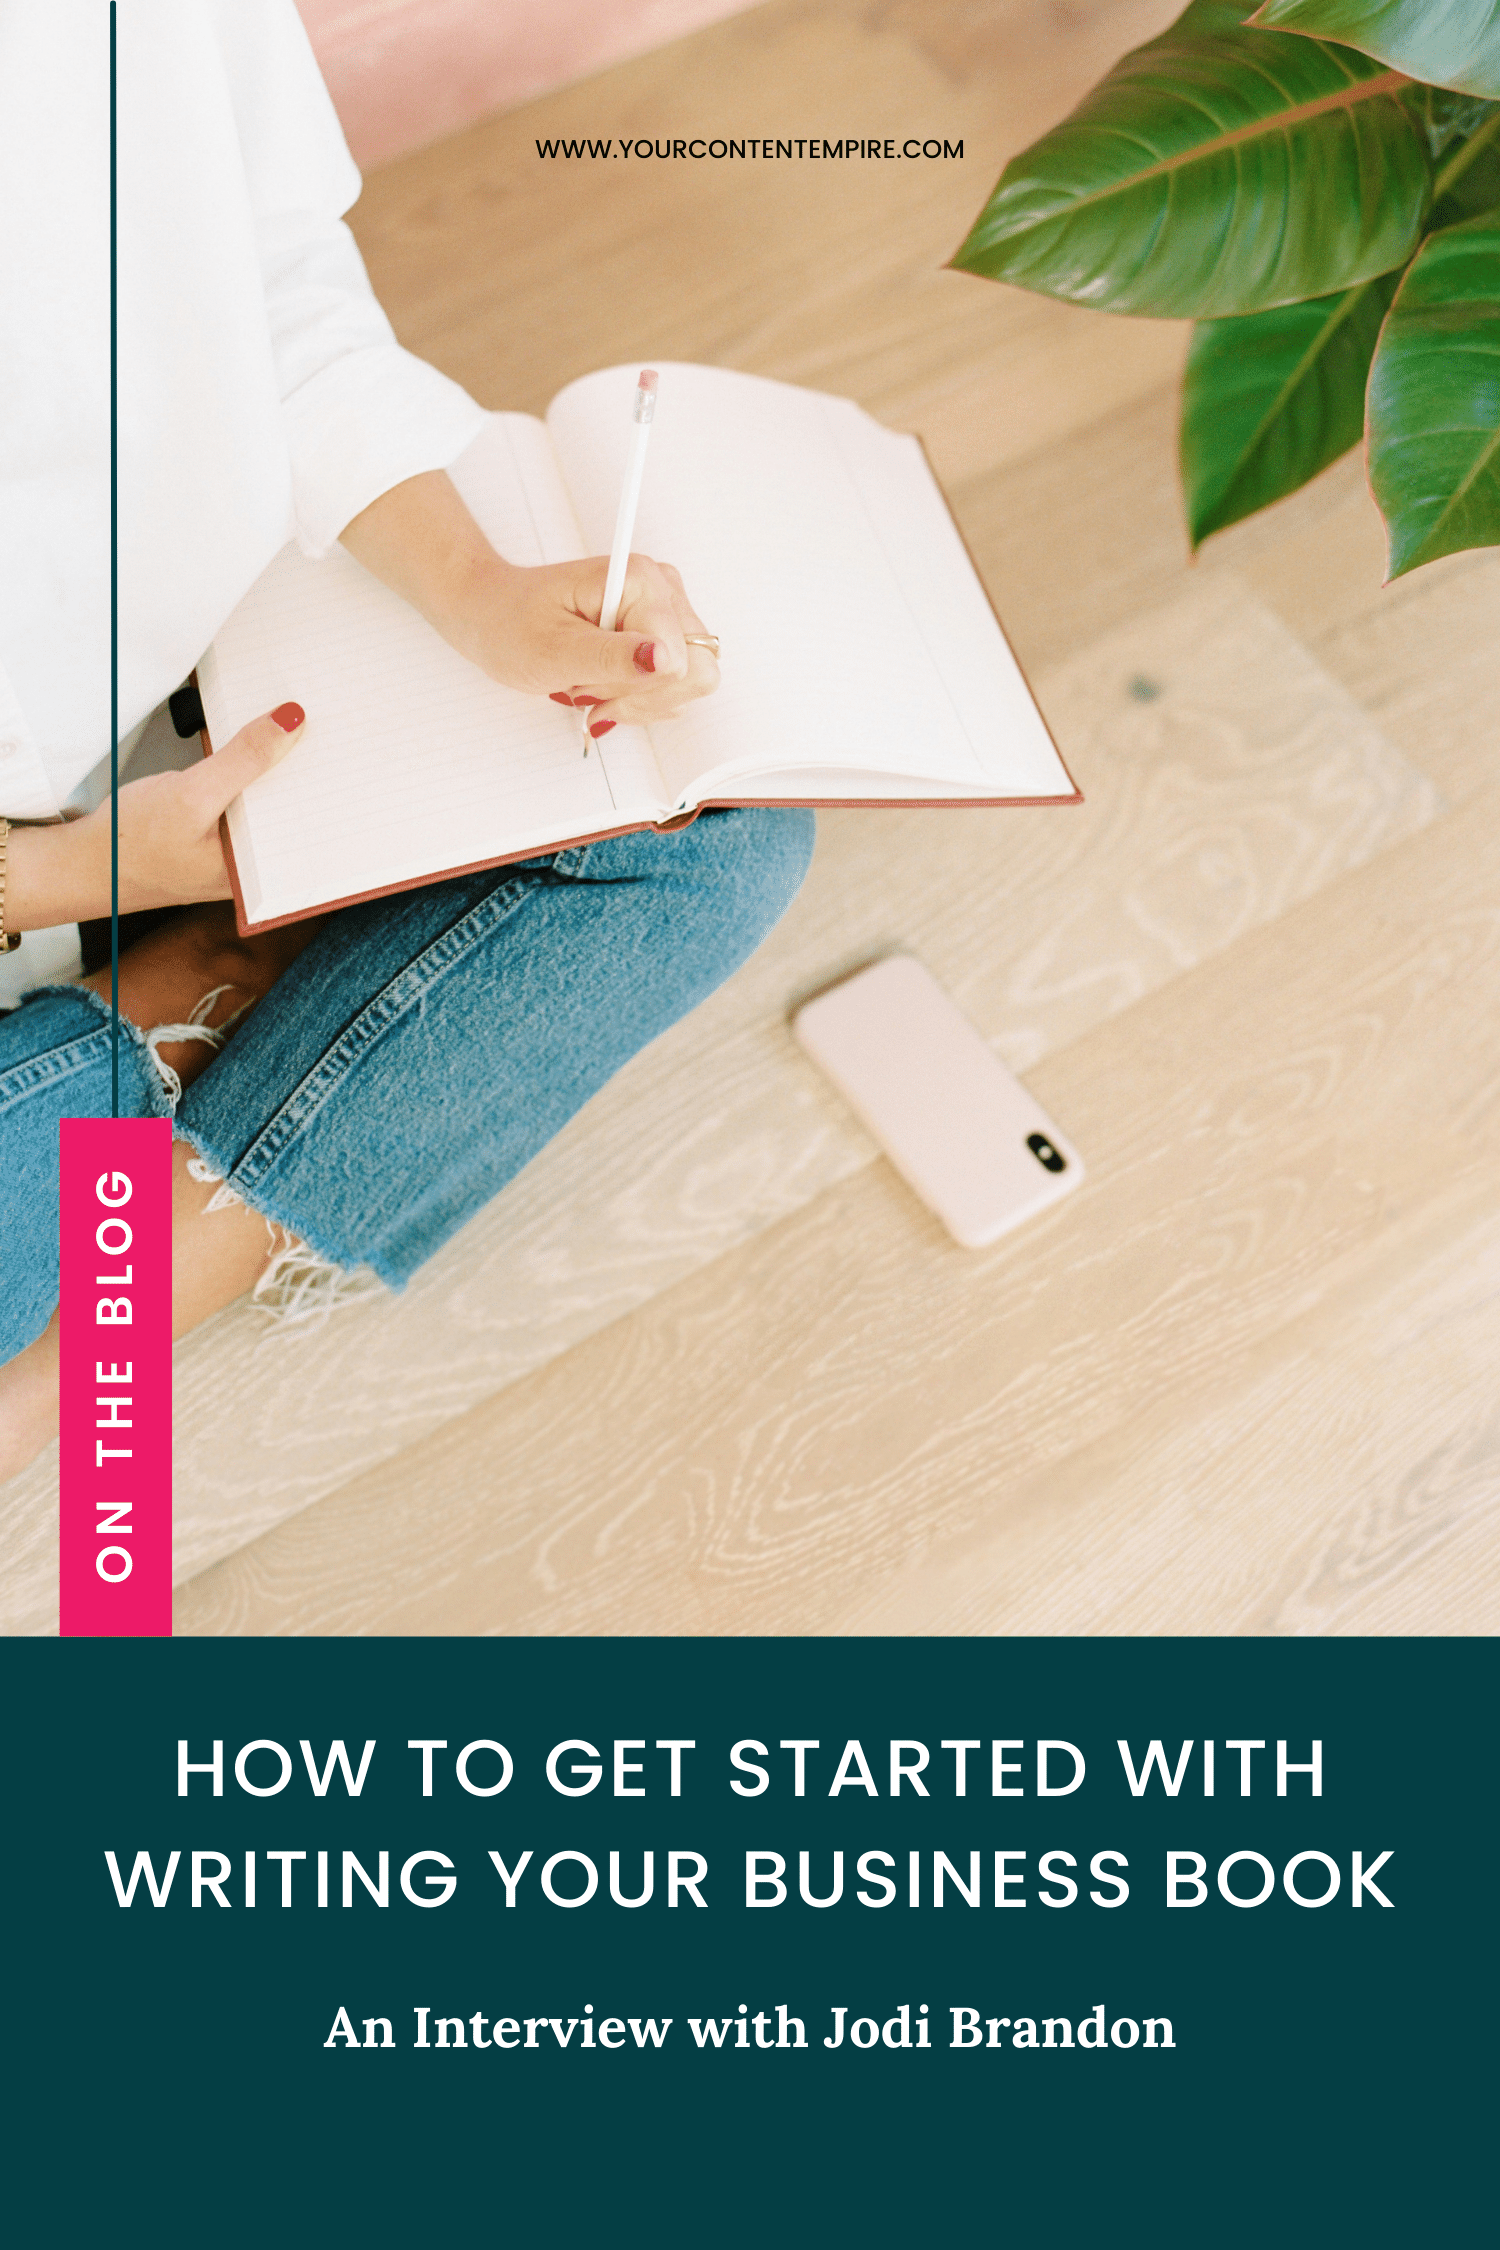 How to Get Started With Writing Your Business Book